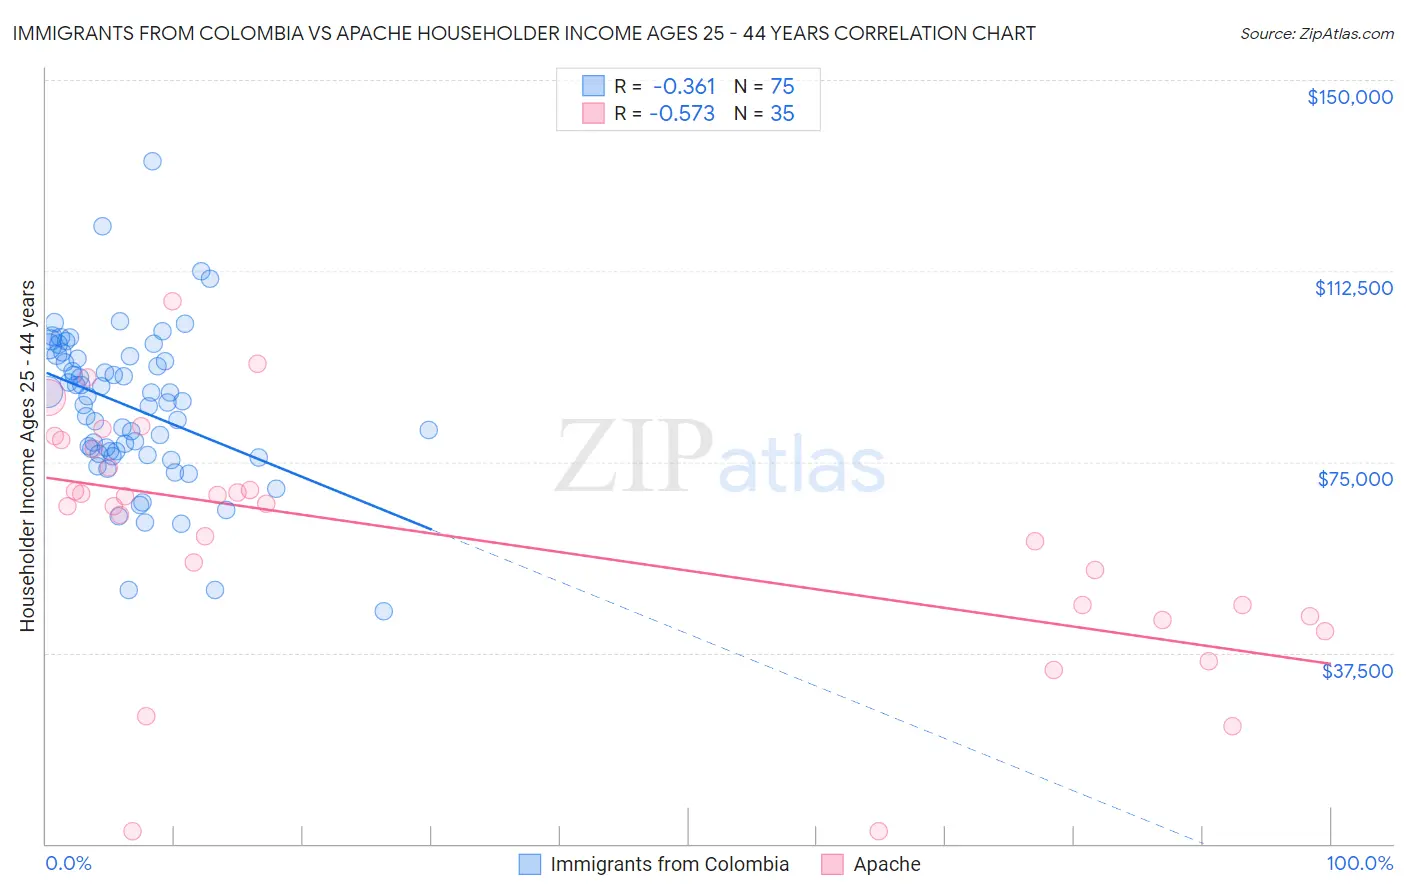 Immigrants from Colombia vs Apache Householder Income Ages 25 - 44 years